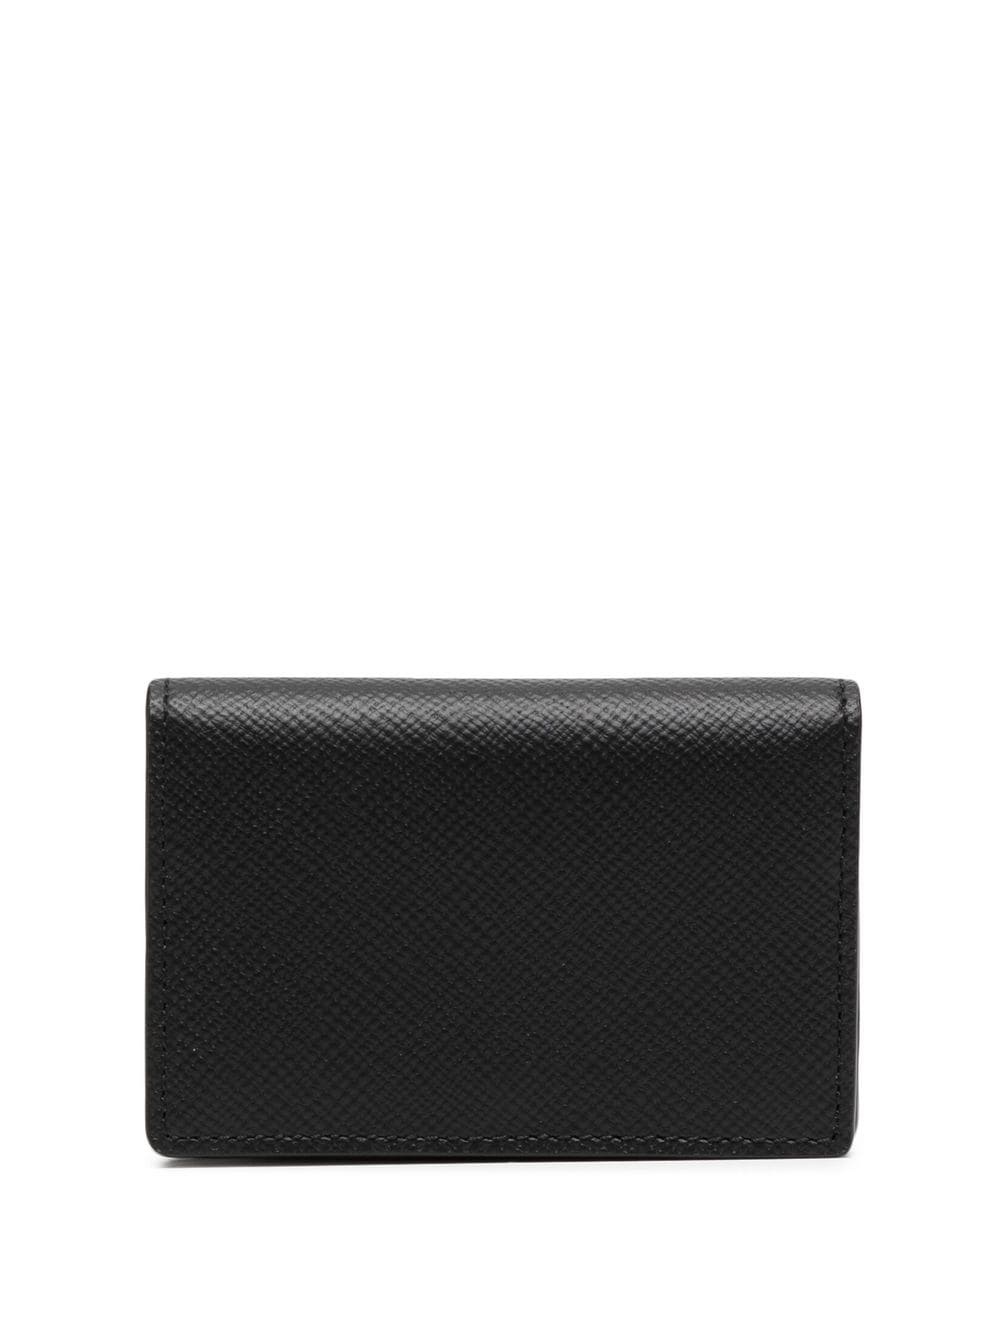 leather foldover wallet - 2